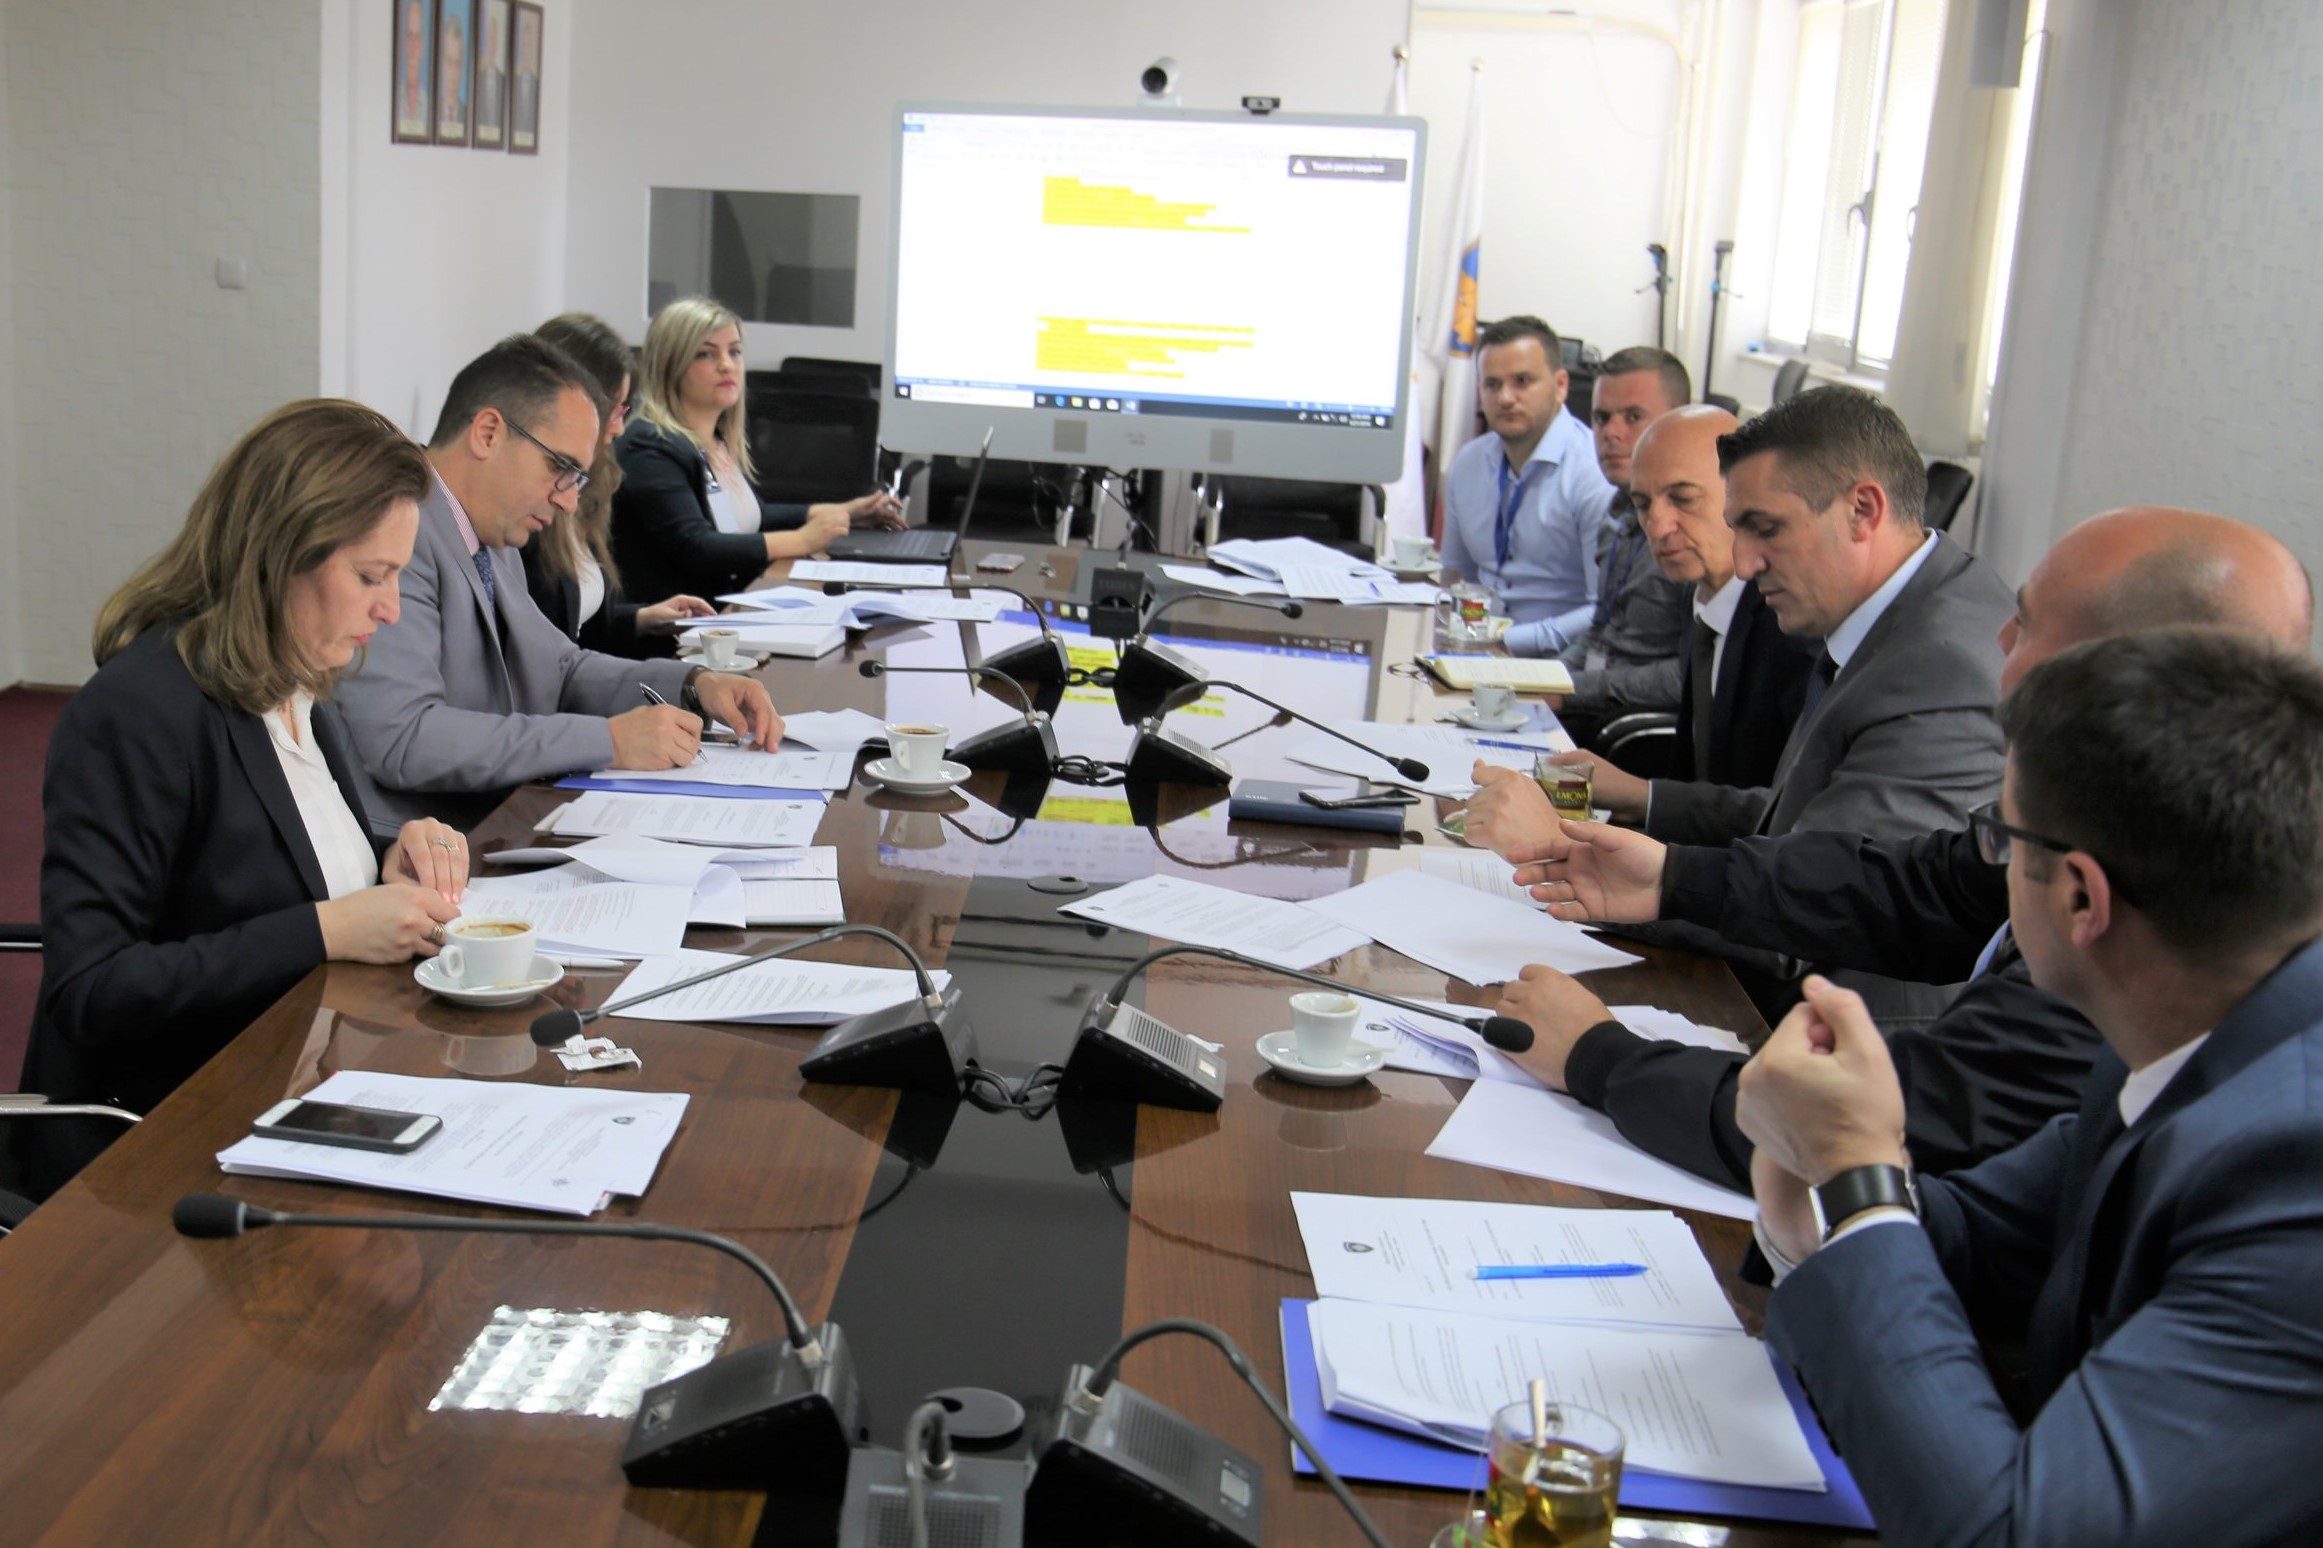 The work on amending the Regulation on Disciplinary Procedure of Prosecutors continues